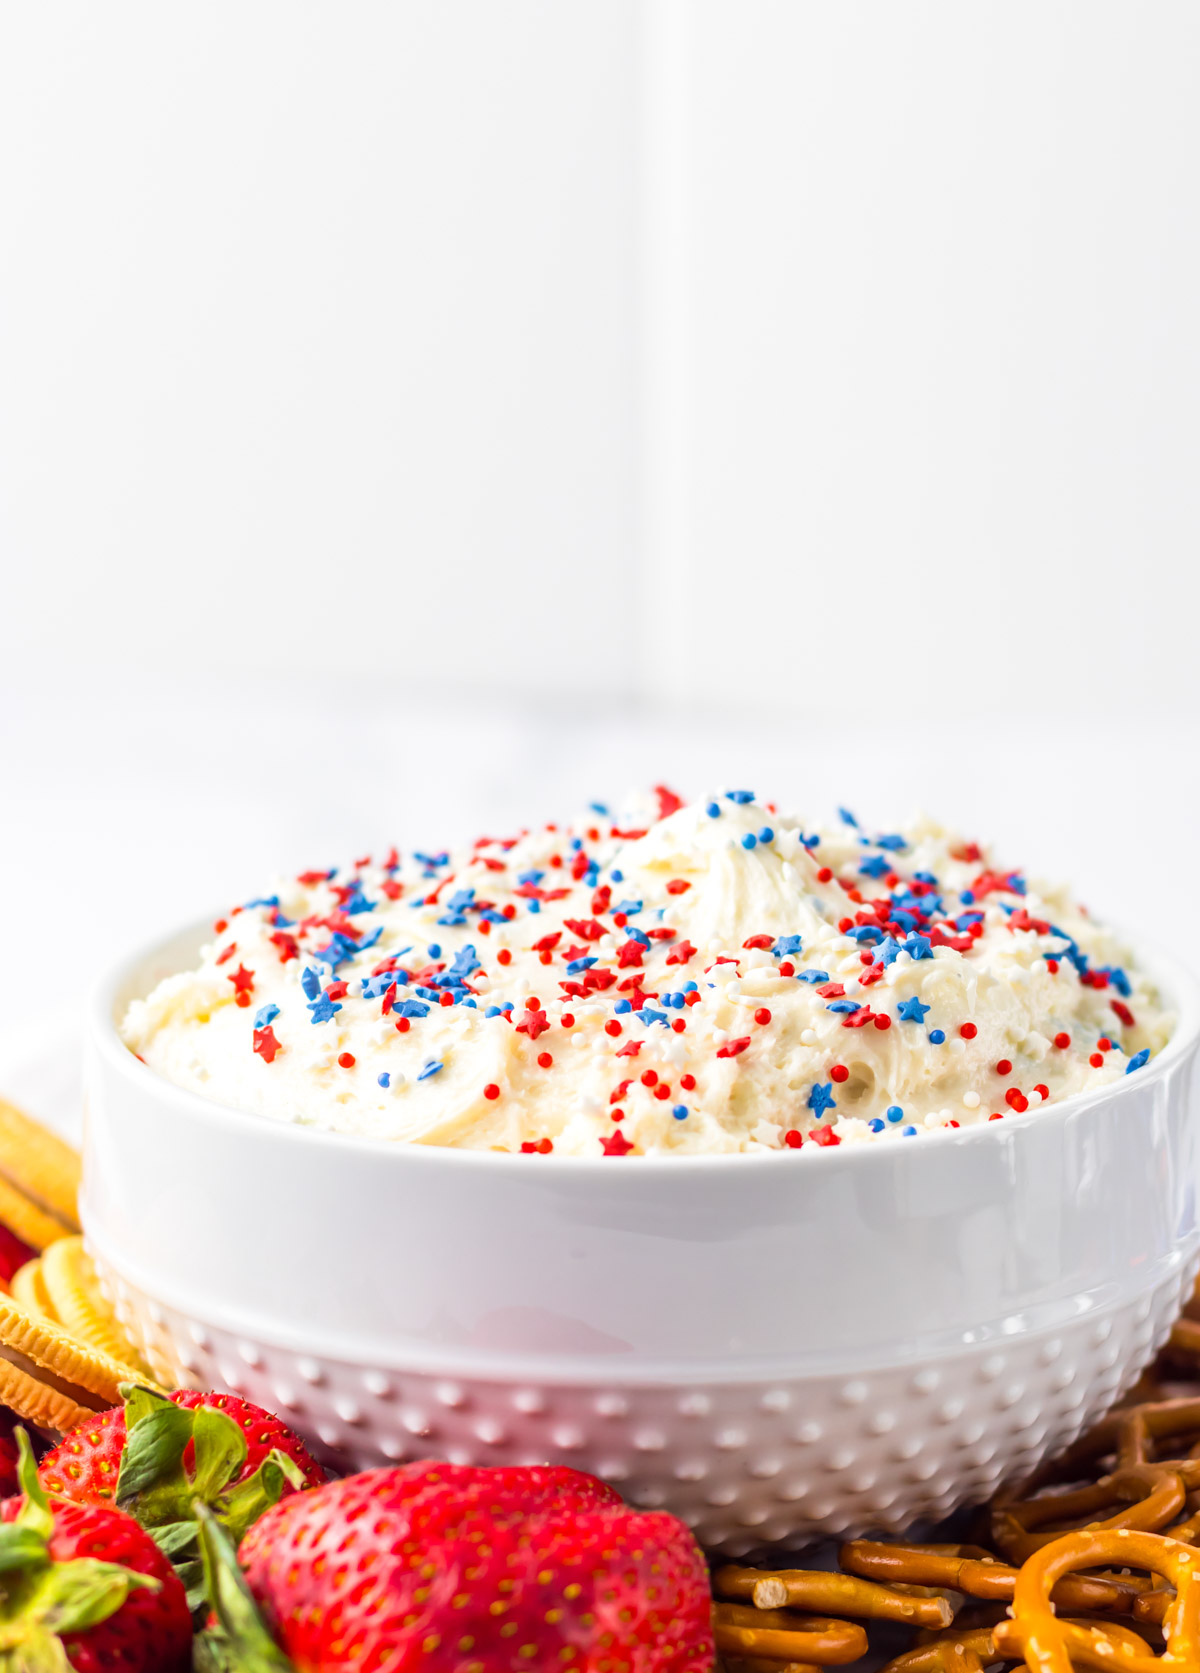 the finished cake dip in a white serving bowl.